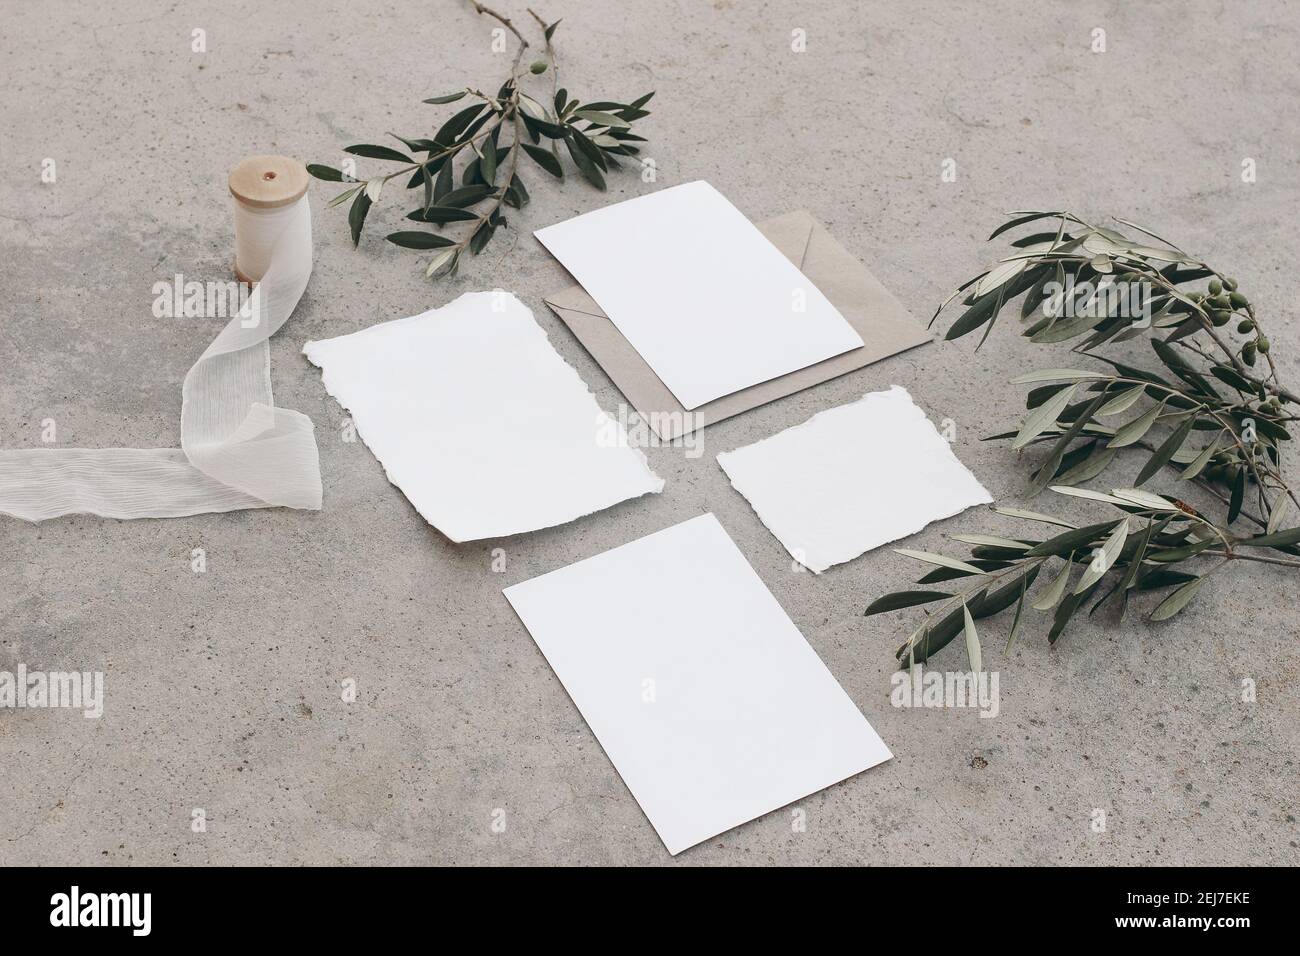 Summer wedding stationery, birthday mock-ups. Blank greeting cards, invitations set. White silk ribbon and olive tree branches. Grunge concrete Stock Photo